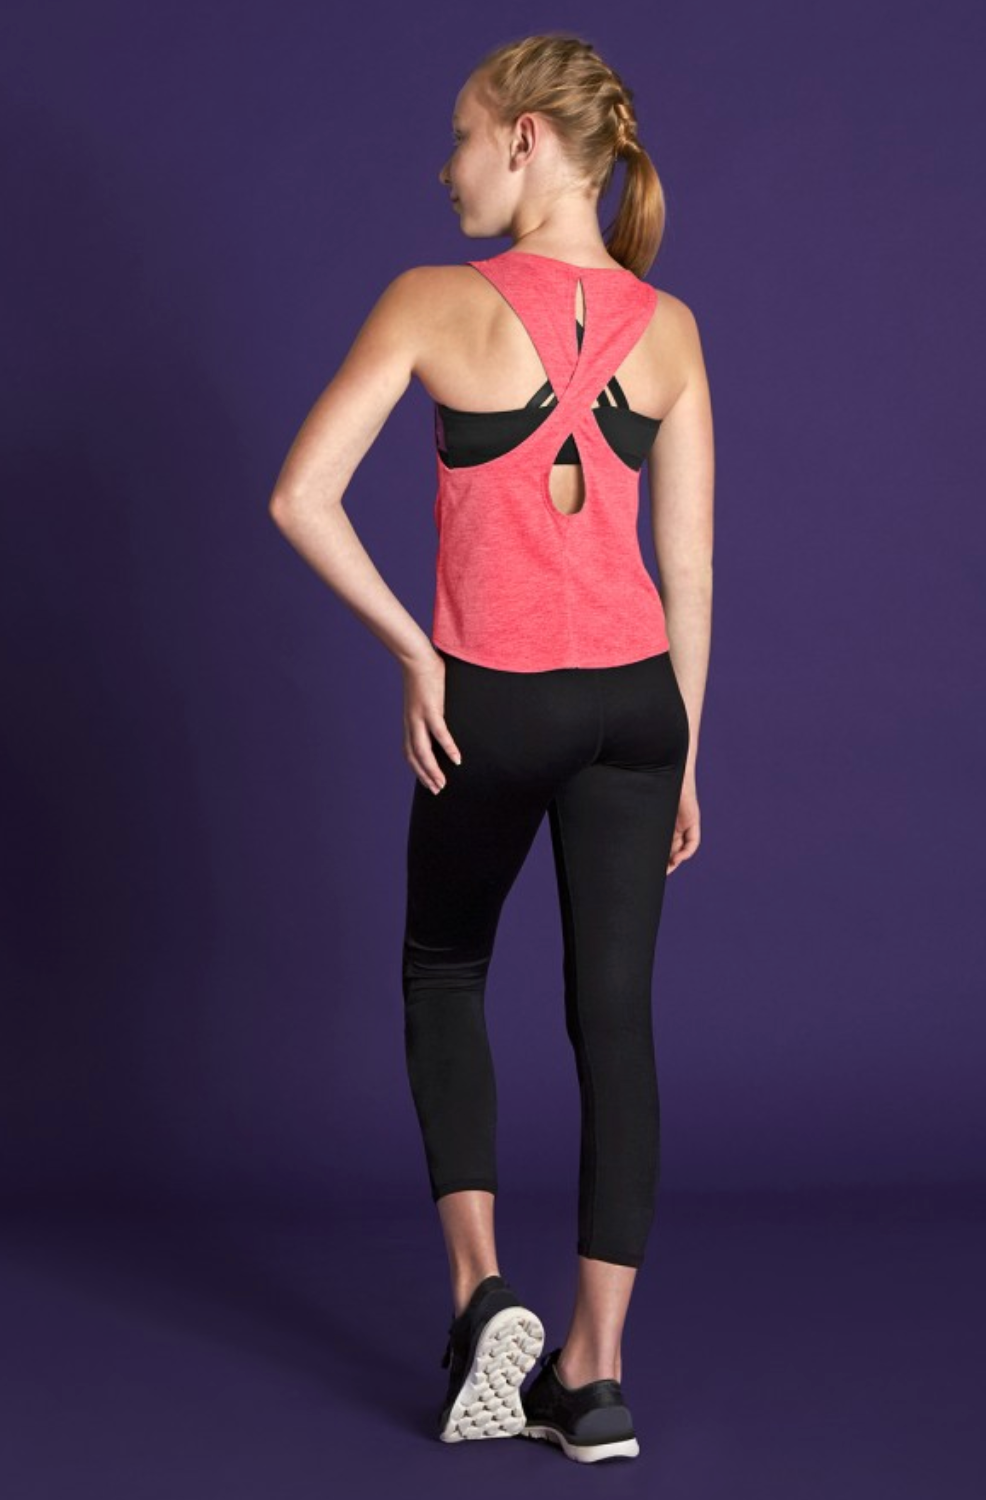 Dance Tank Top With Open Bow Back